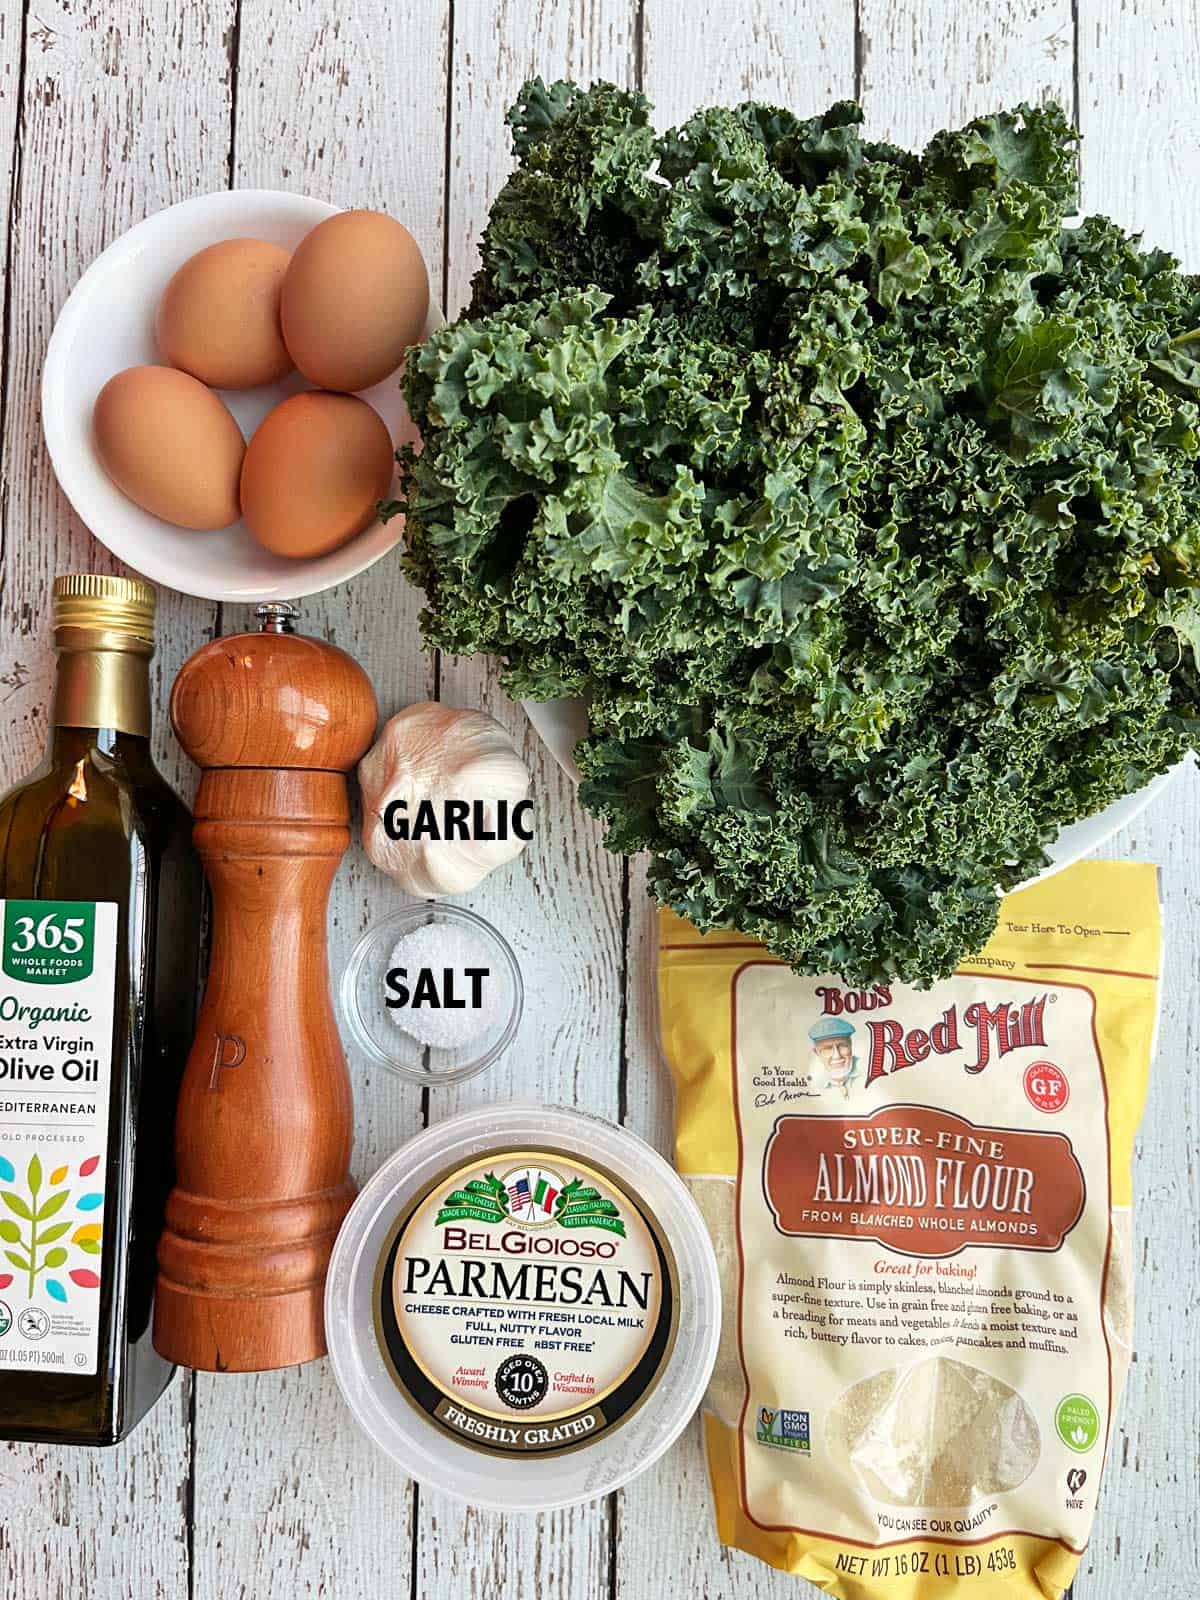 The ingredients needed to make kale fritters.